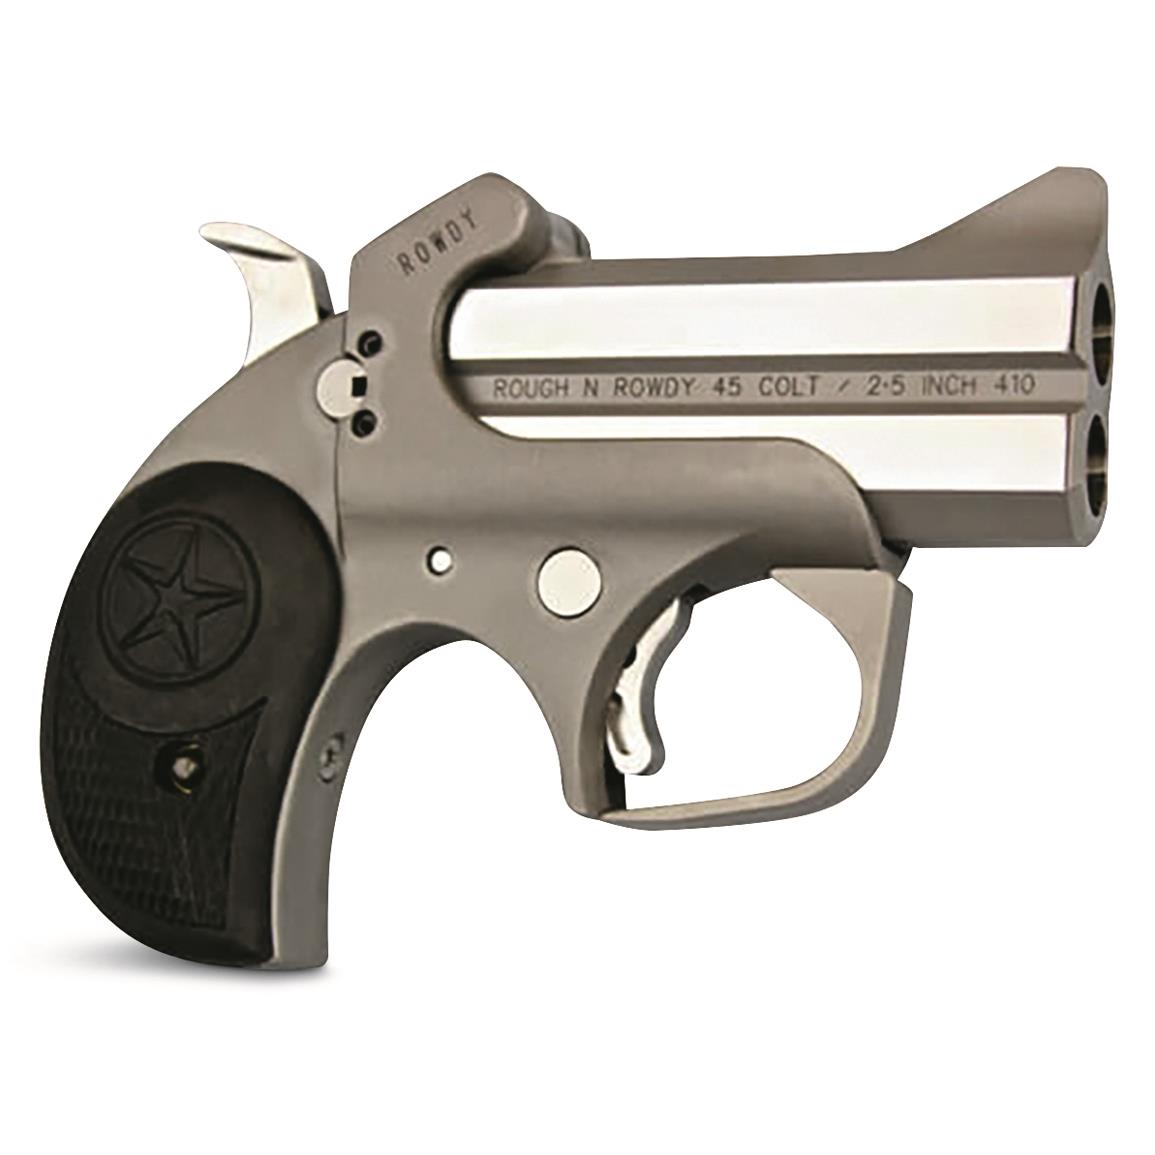 Bond Arms Rowdy, Over/Under, .45 Colt/.410 Bore, 3" Barrels, 2 Rounds